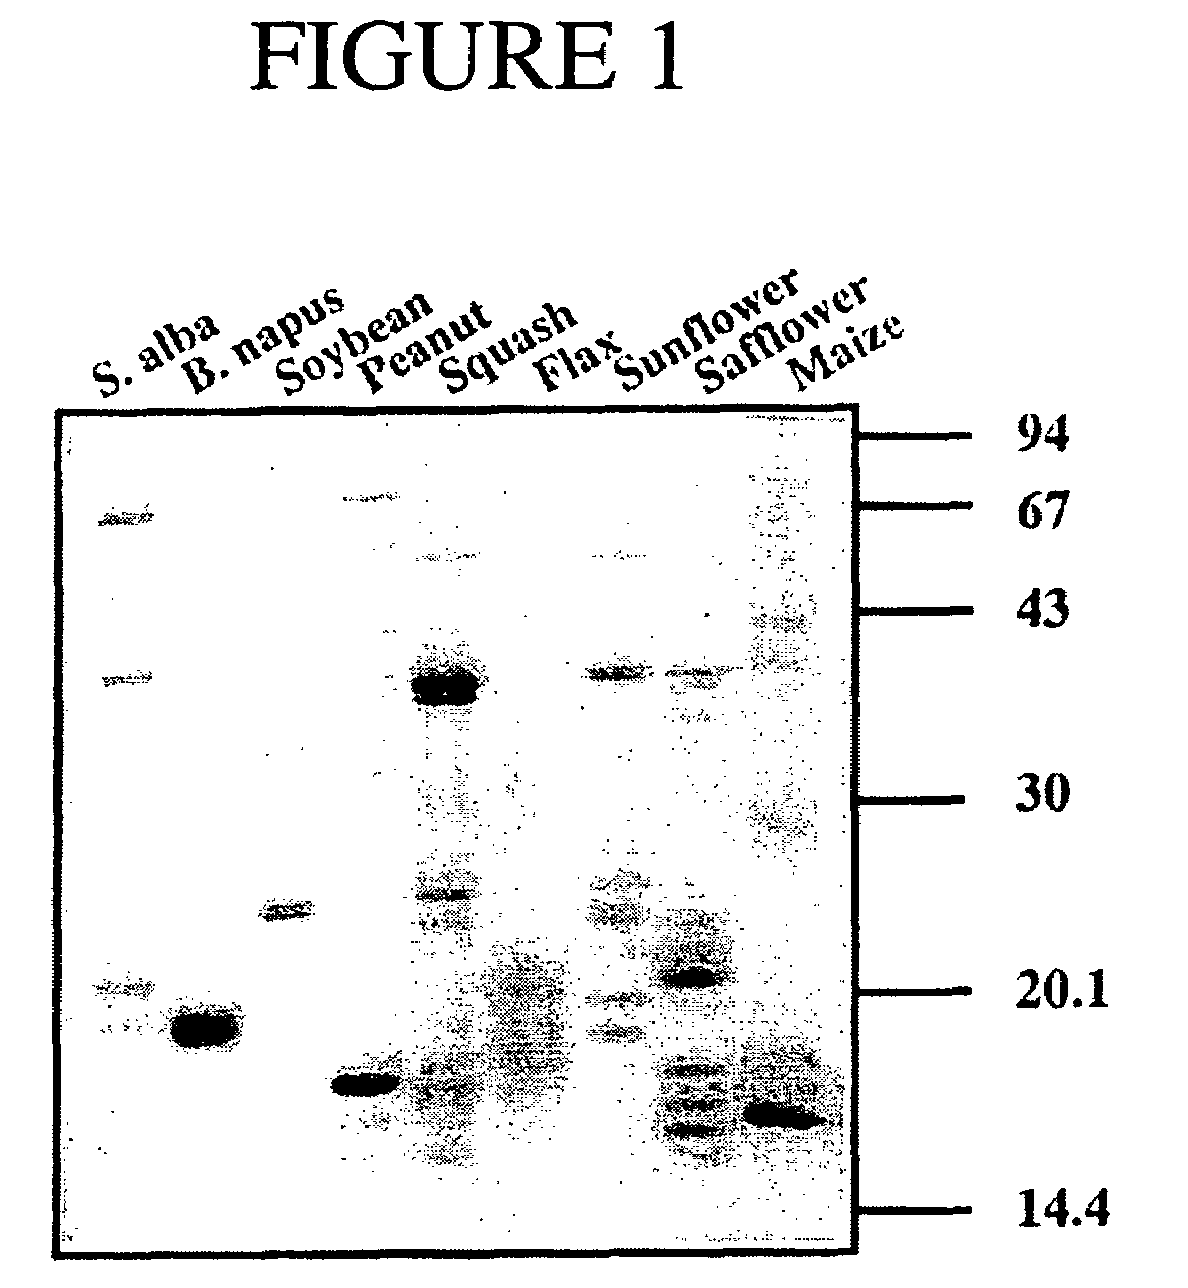 Thioredoxin and thioredoxin reductase containing oil body based products